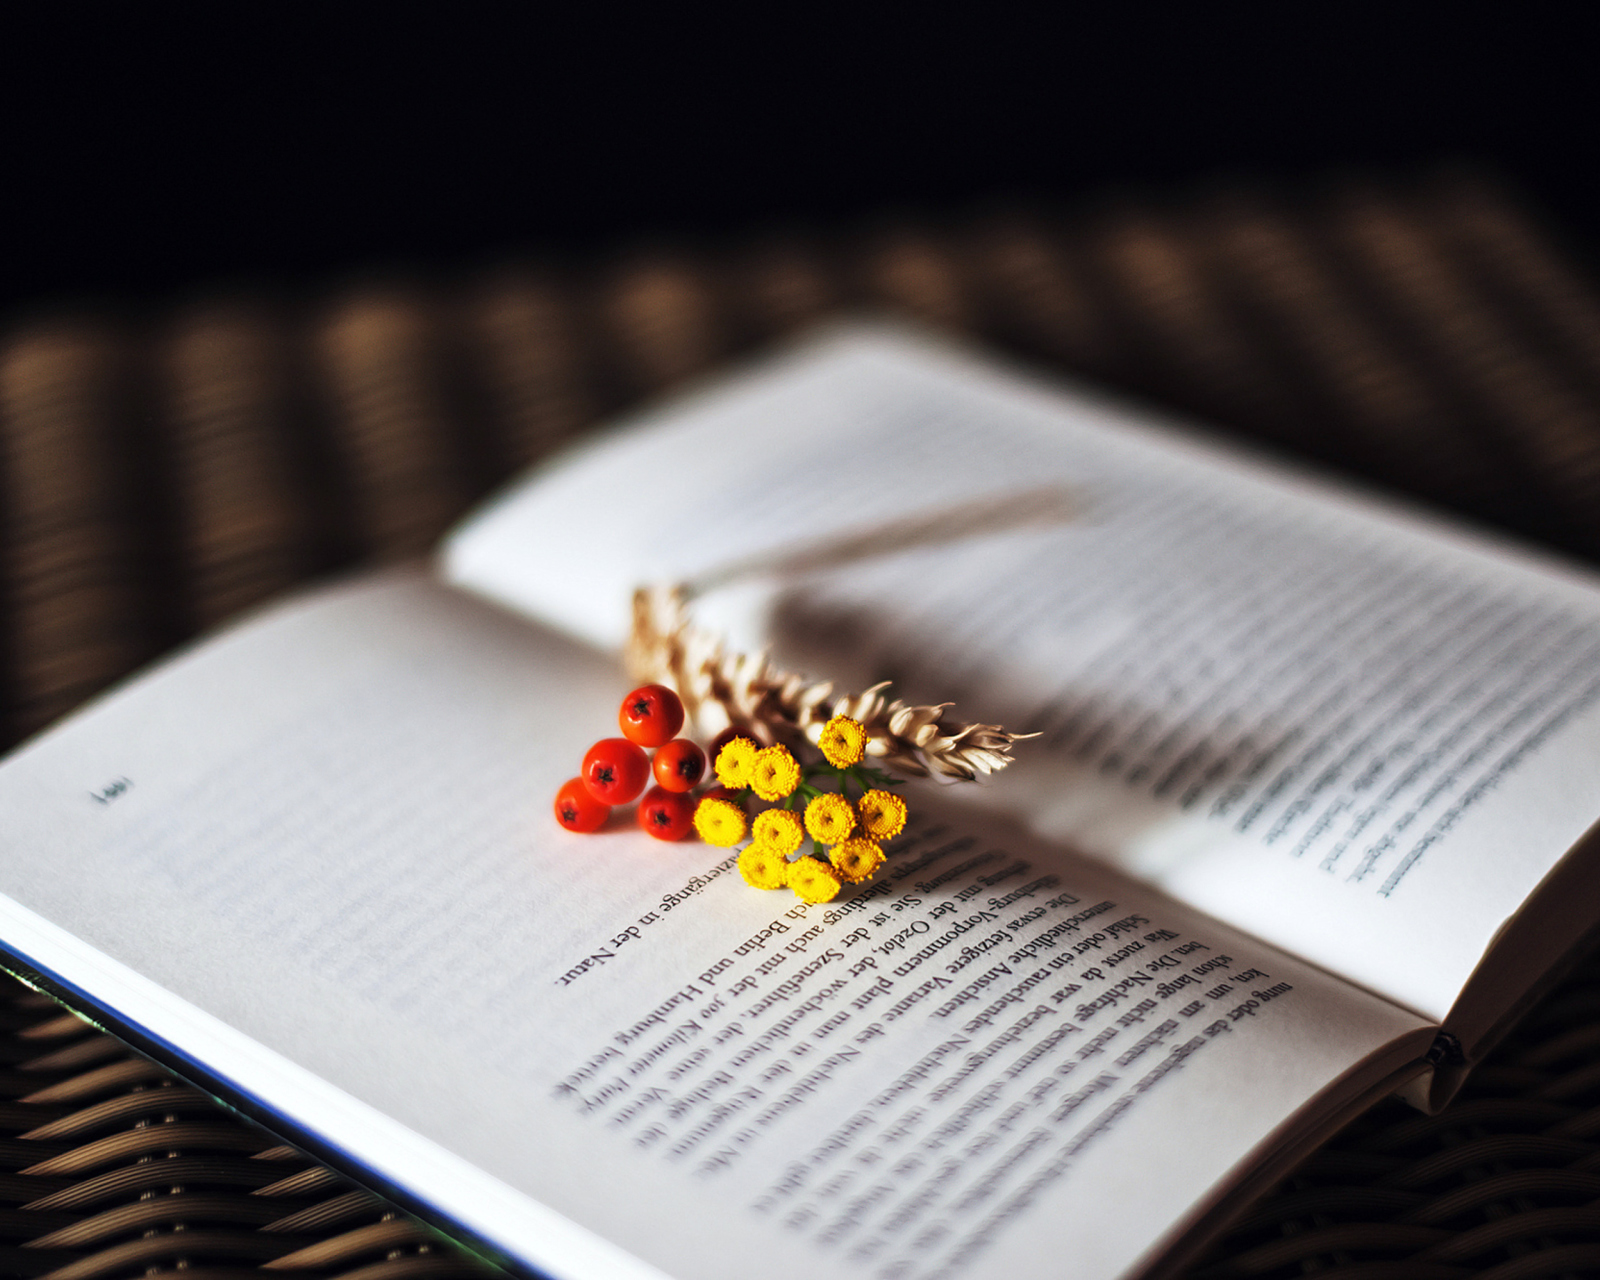 Berries And Flowers On Book screenshot #1 1600x1280